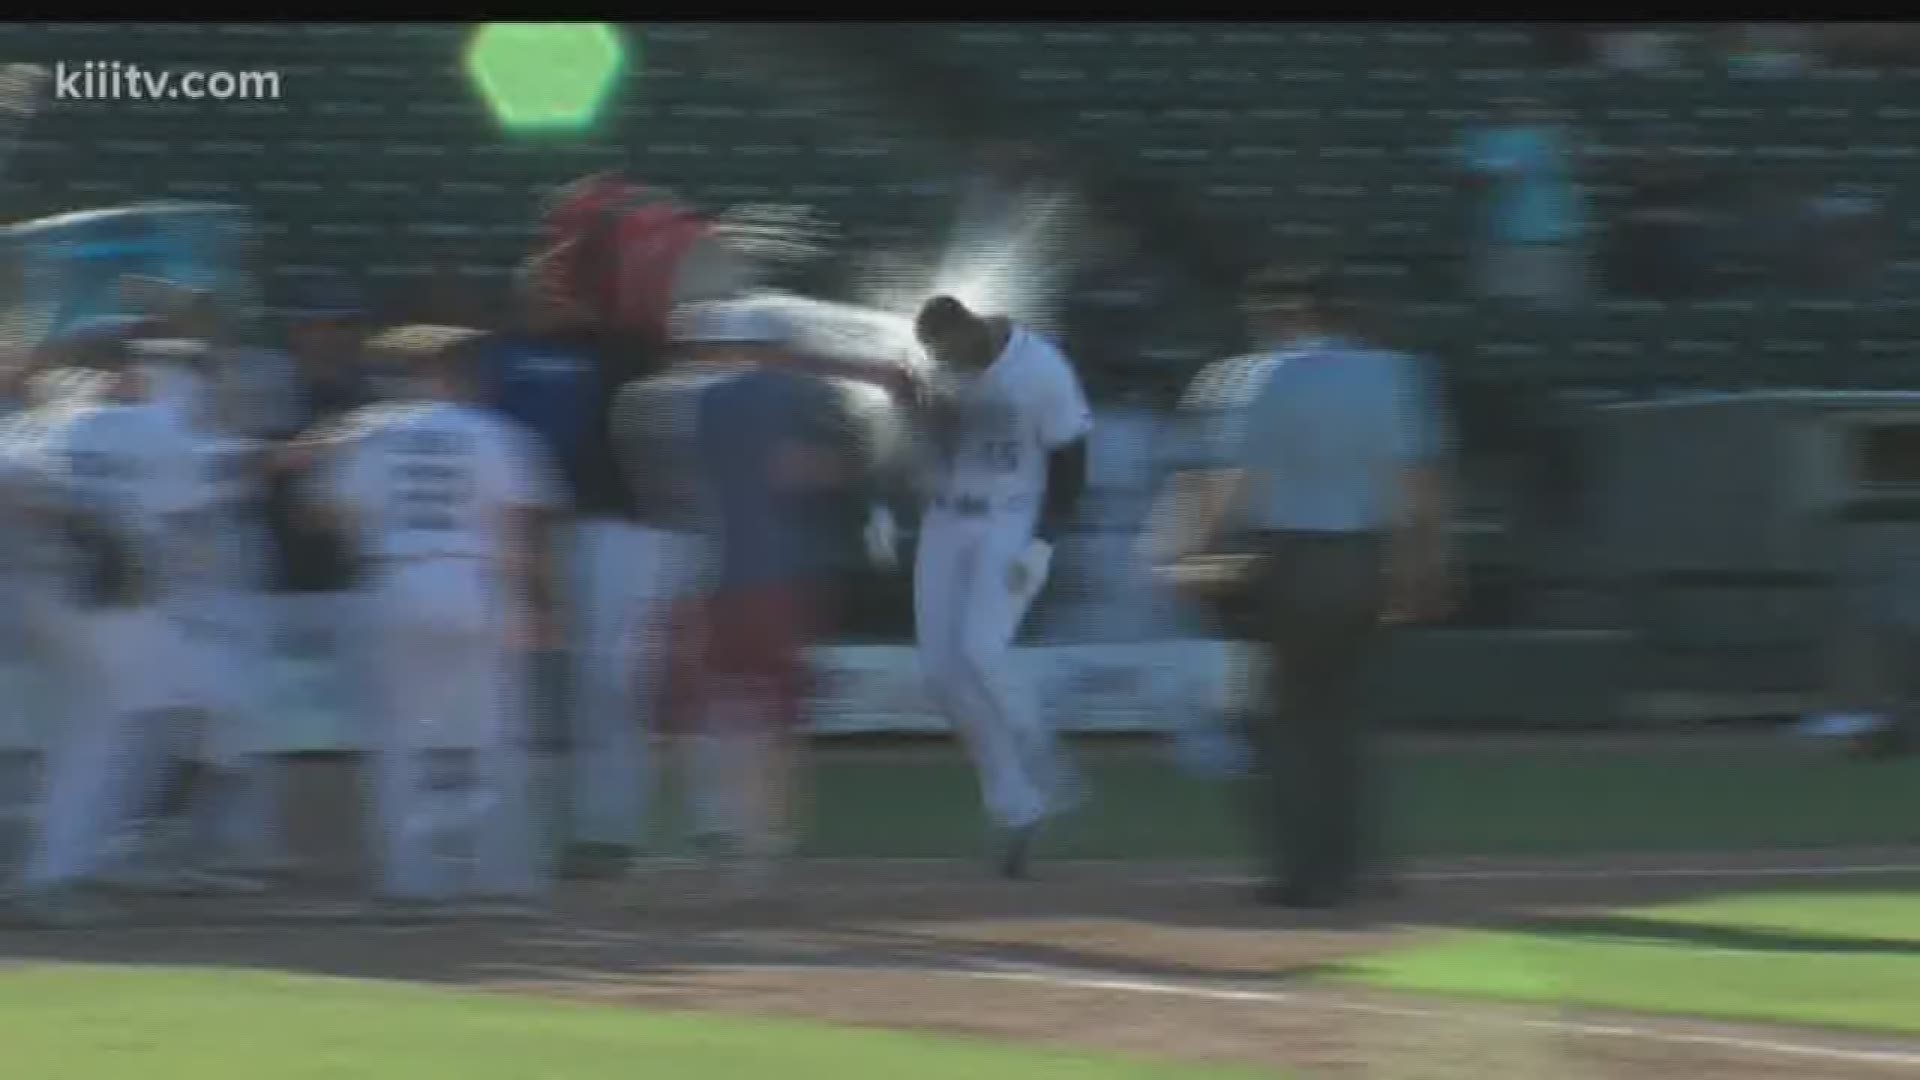 In a back-and-forth game, Yordan Alvarez delivered a walk-off homerun in the 11th inning to give the Hooks a 10-7 win over the Travelers.